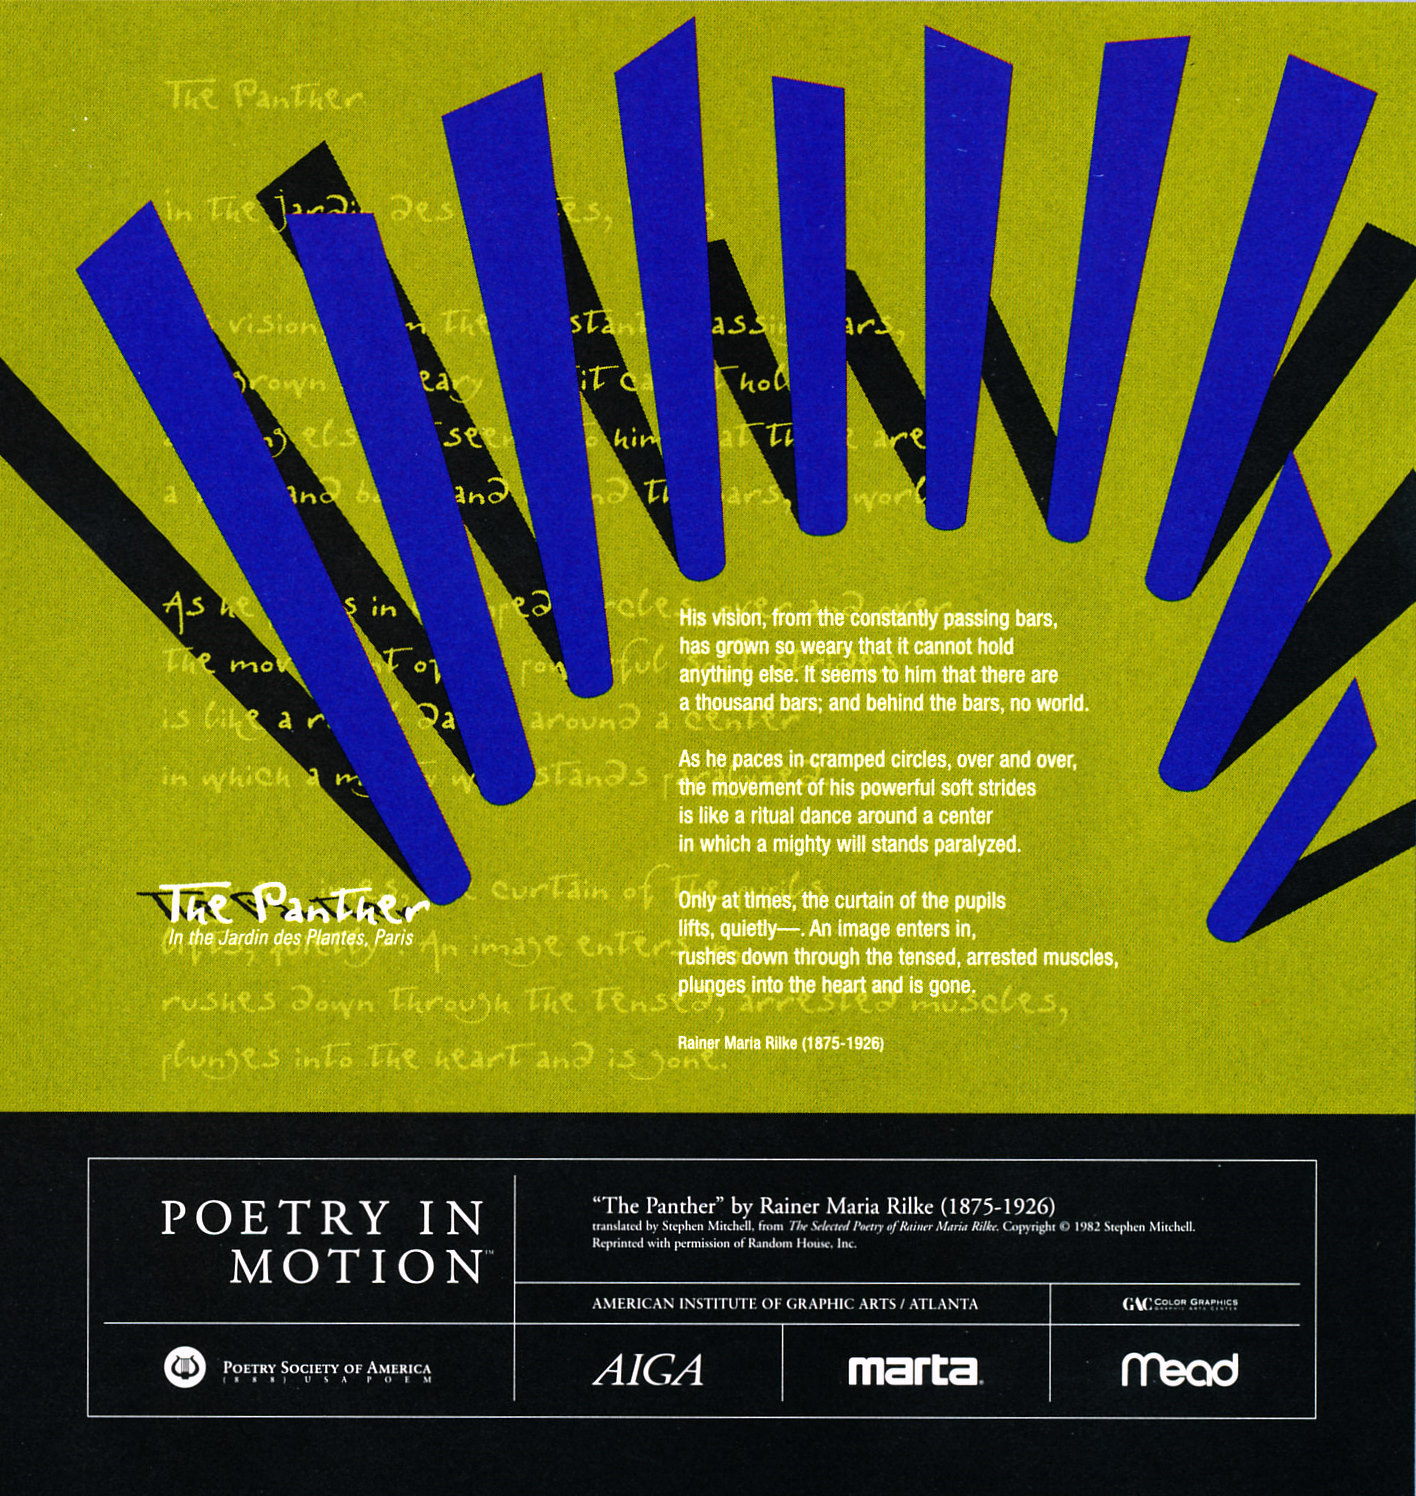 A lime green poster with blue and black bars features the poem The Panther by Rainer Maria Rilke written in white text.